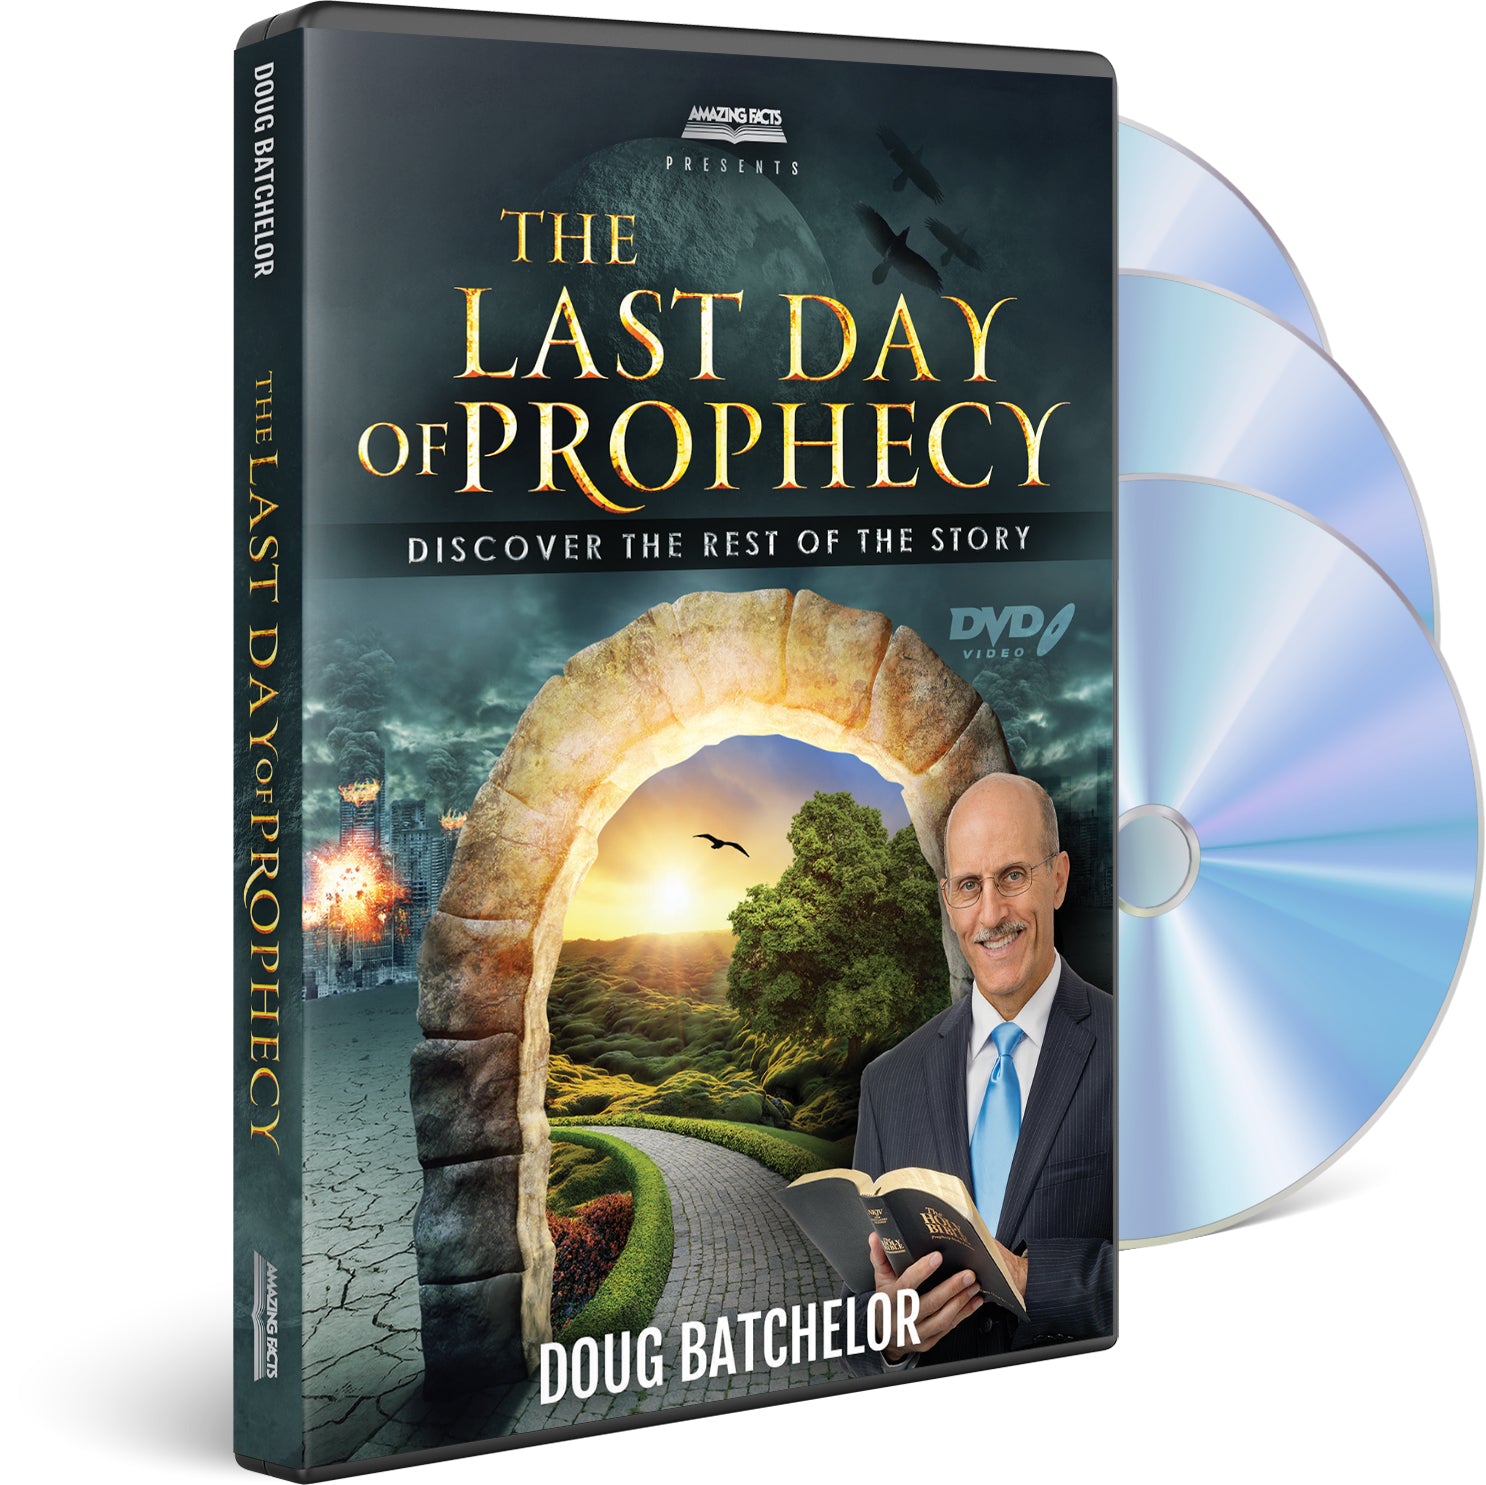 The Last Day of Prophecy | DVD Set